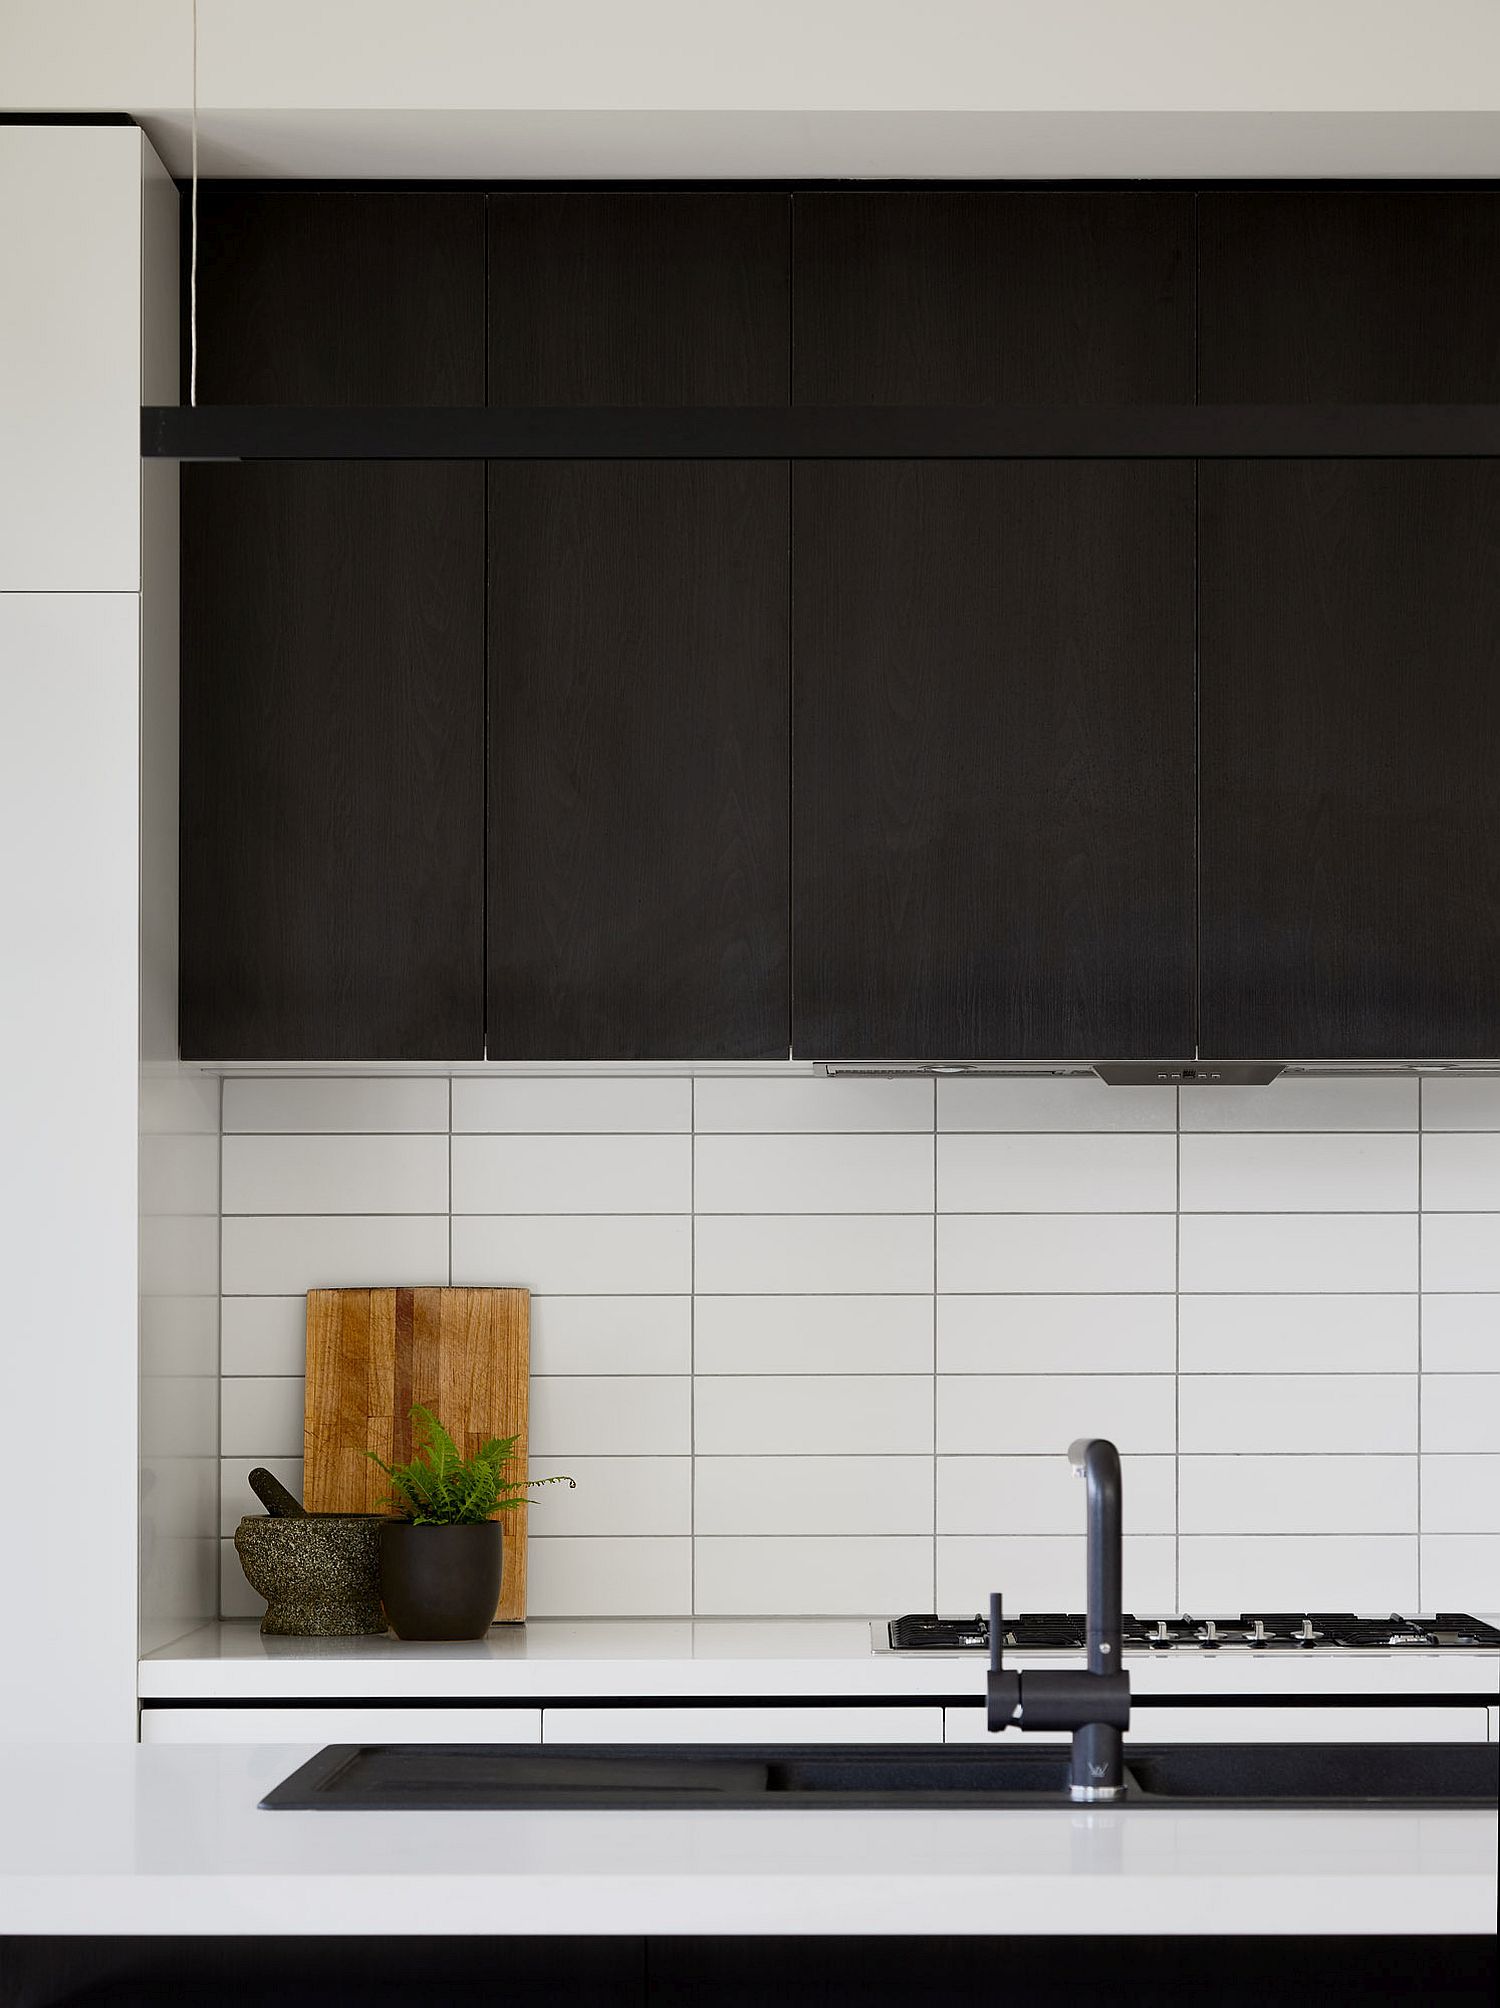 Black and white kitchen with wooden shelves